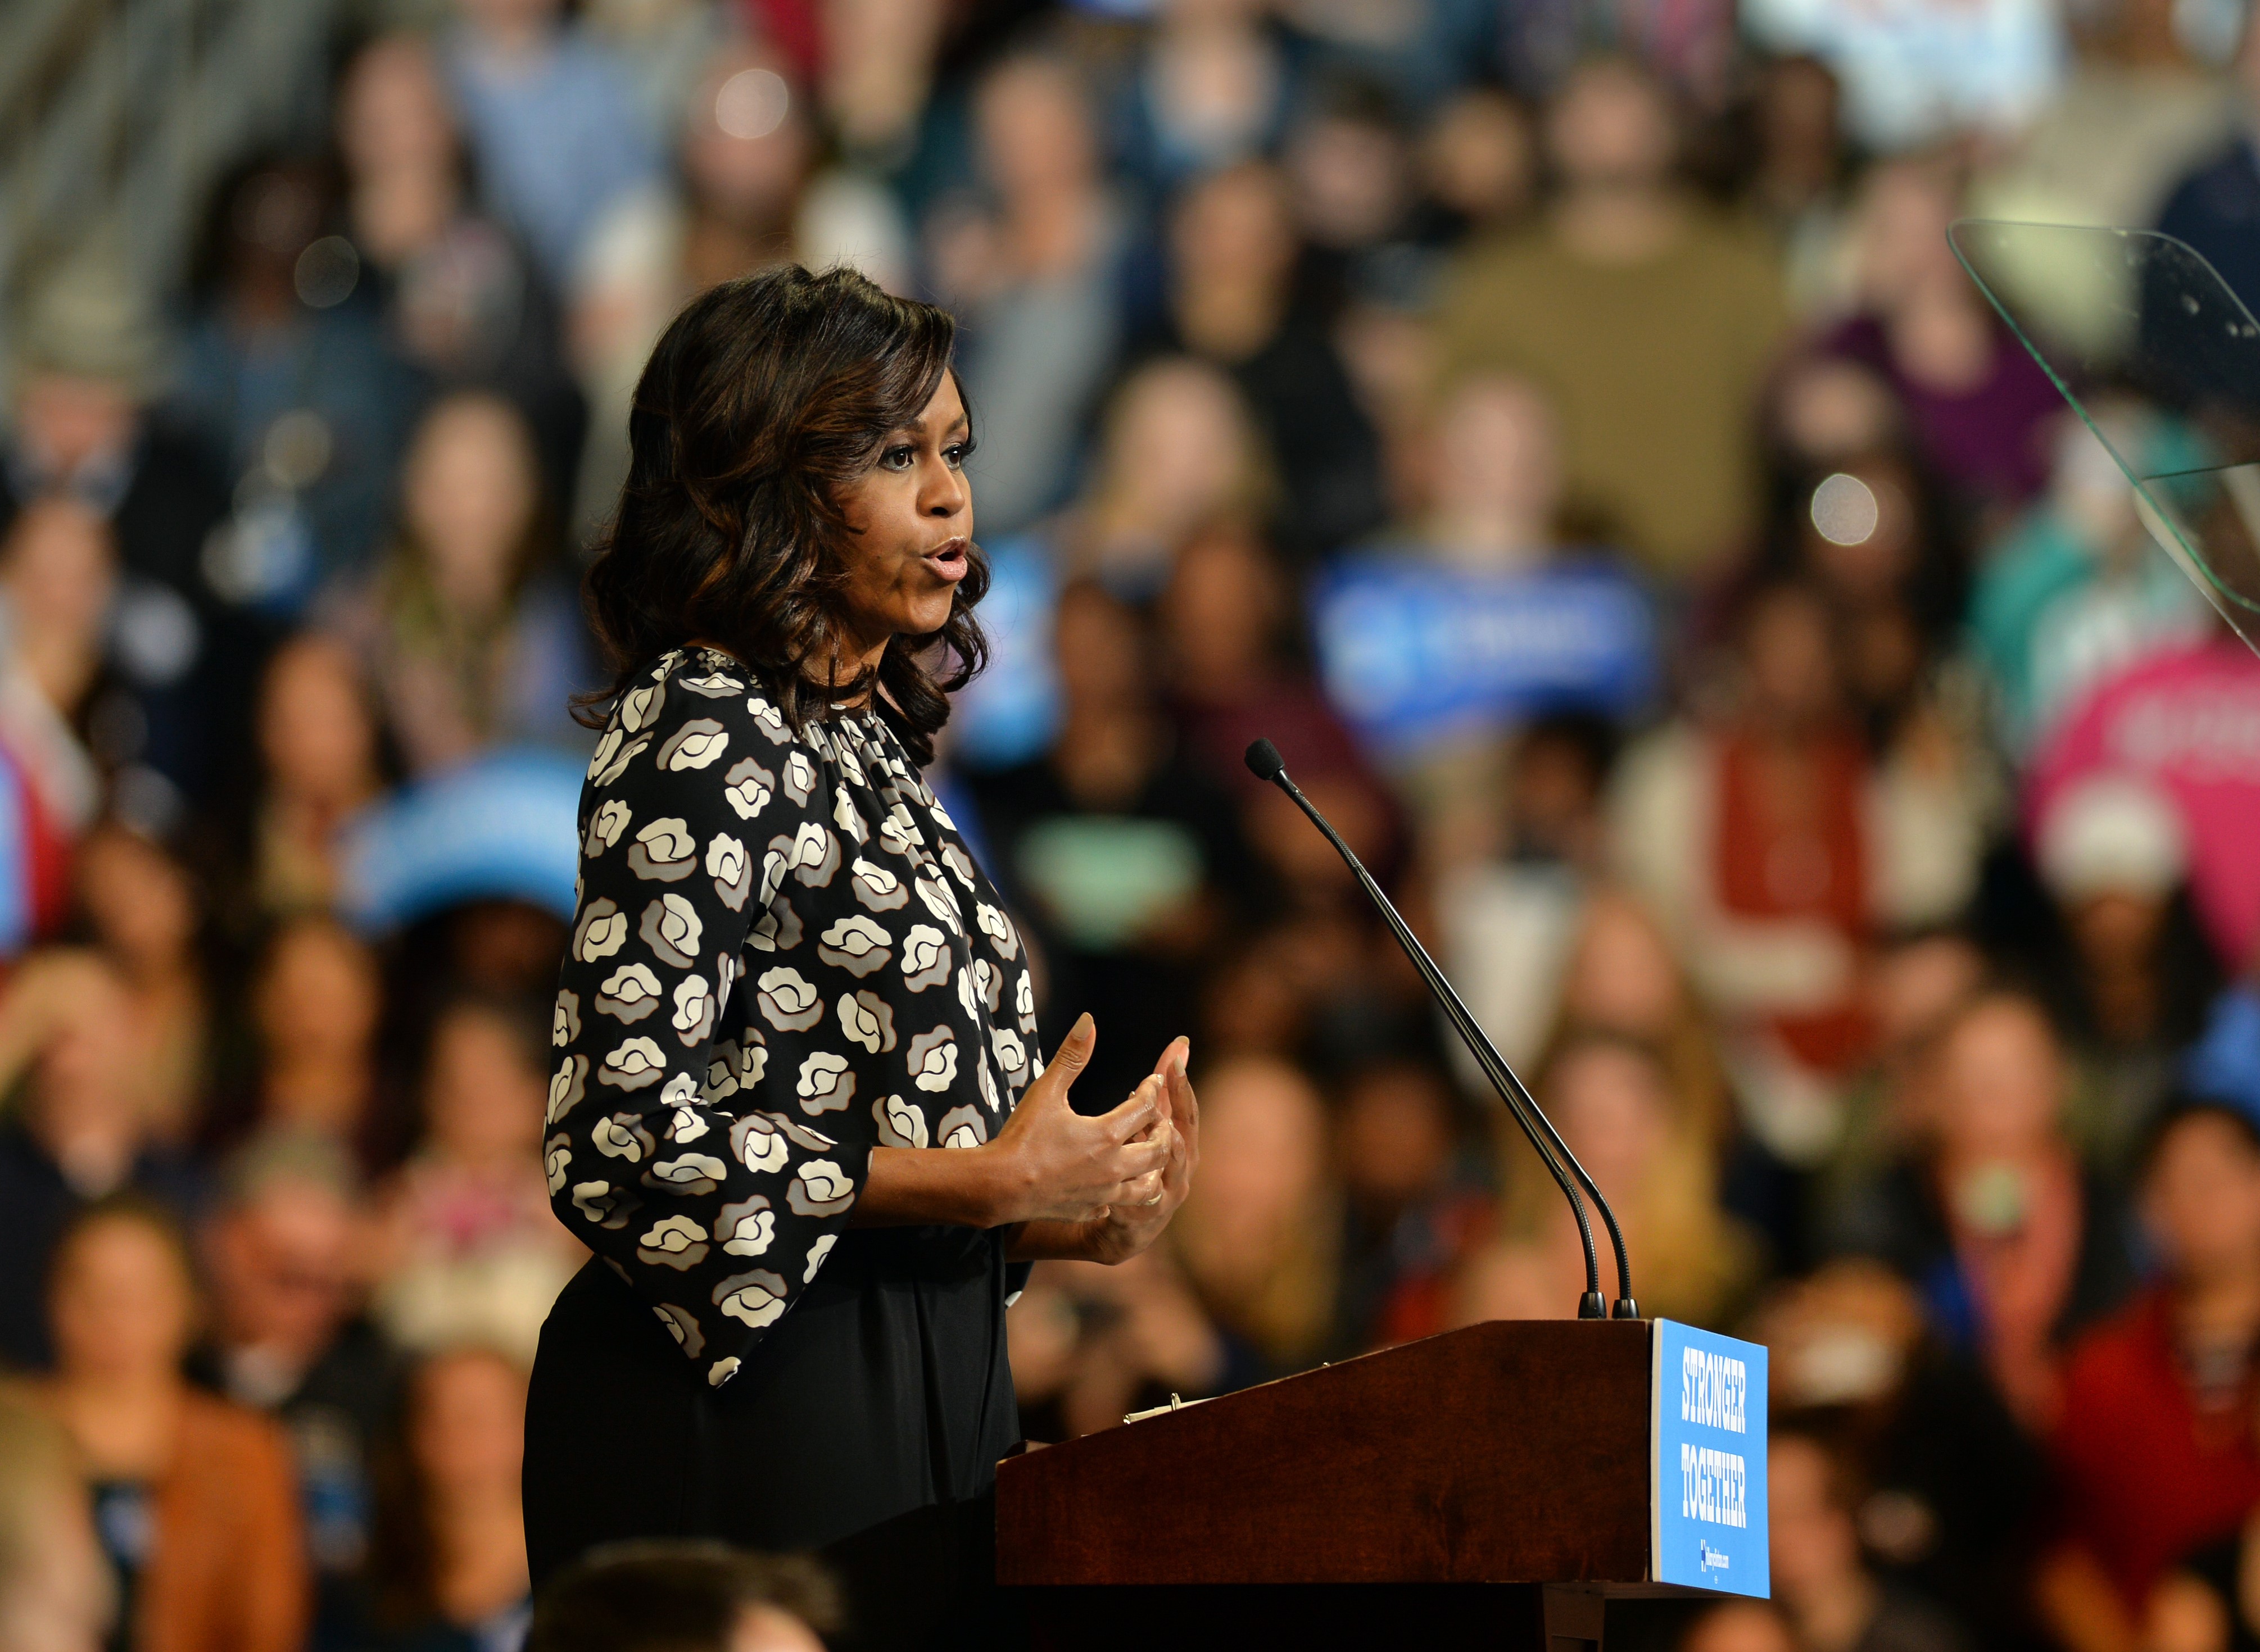 First Lady Michelle Obama speaks during a campaign rally for Democratic presidential nominee Hillary Clinton in Winston-Salem, N.C. on Oct. 27, 2016. (Peter Zay—Anadolu Agency/Getty Images)